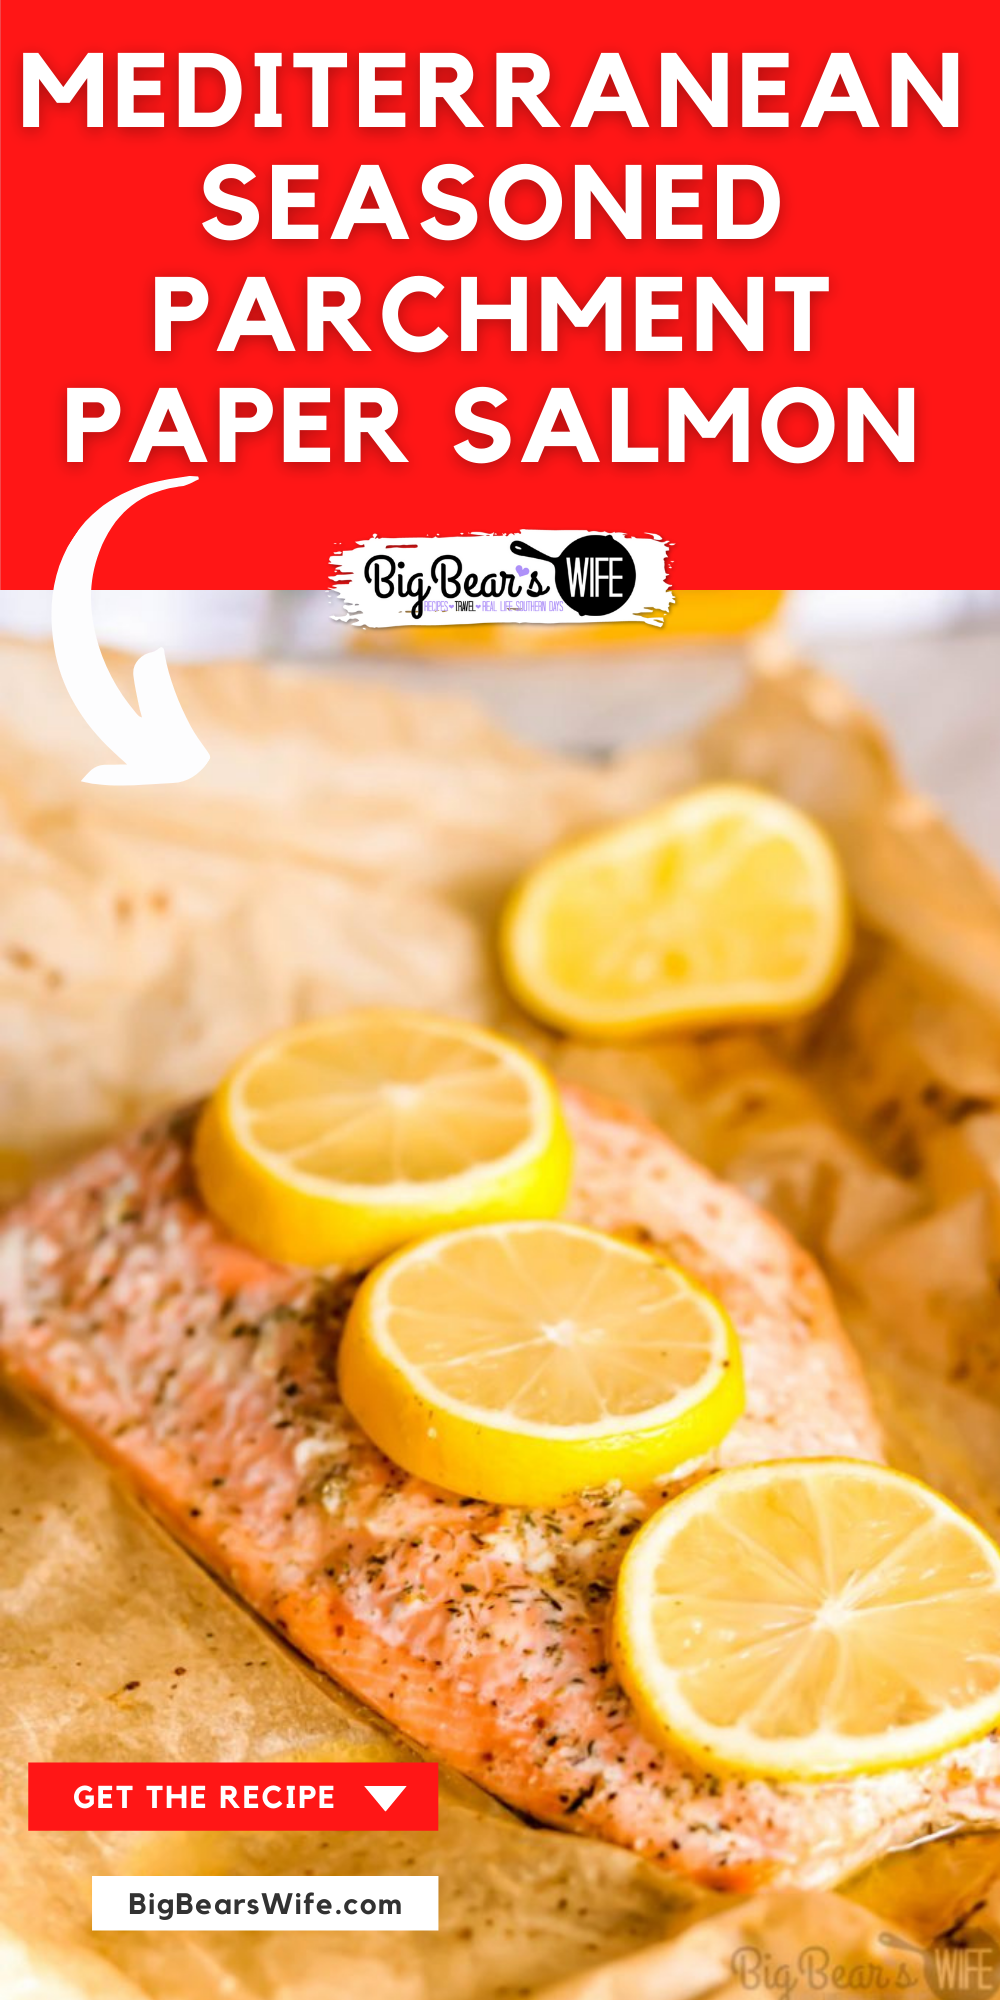 Dinner in under 30 minutes! This recipe for Easy Mediterranean Seasoned Parchment Paper Salmon is quick to make and easy to adapt for all kinds of different seasonings.  via @bigbearswife